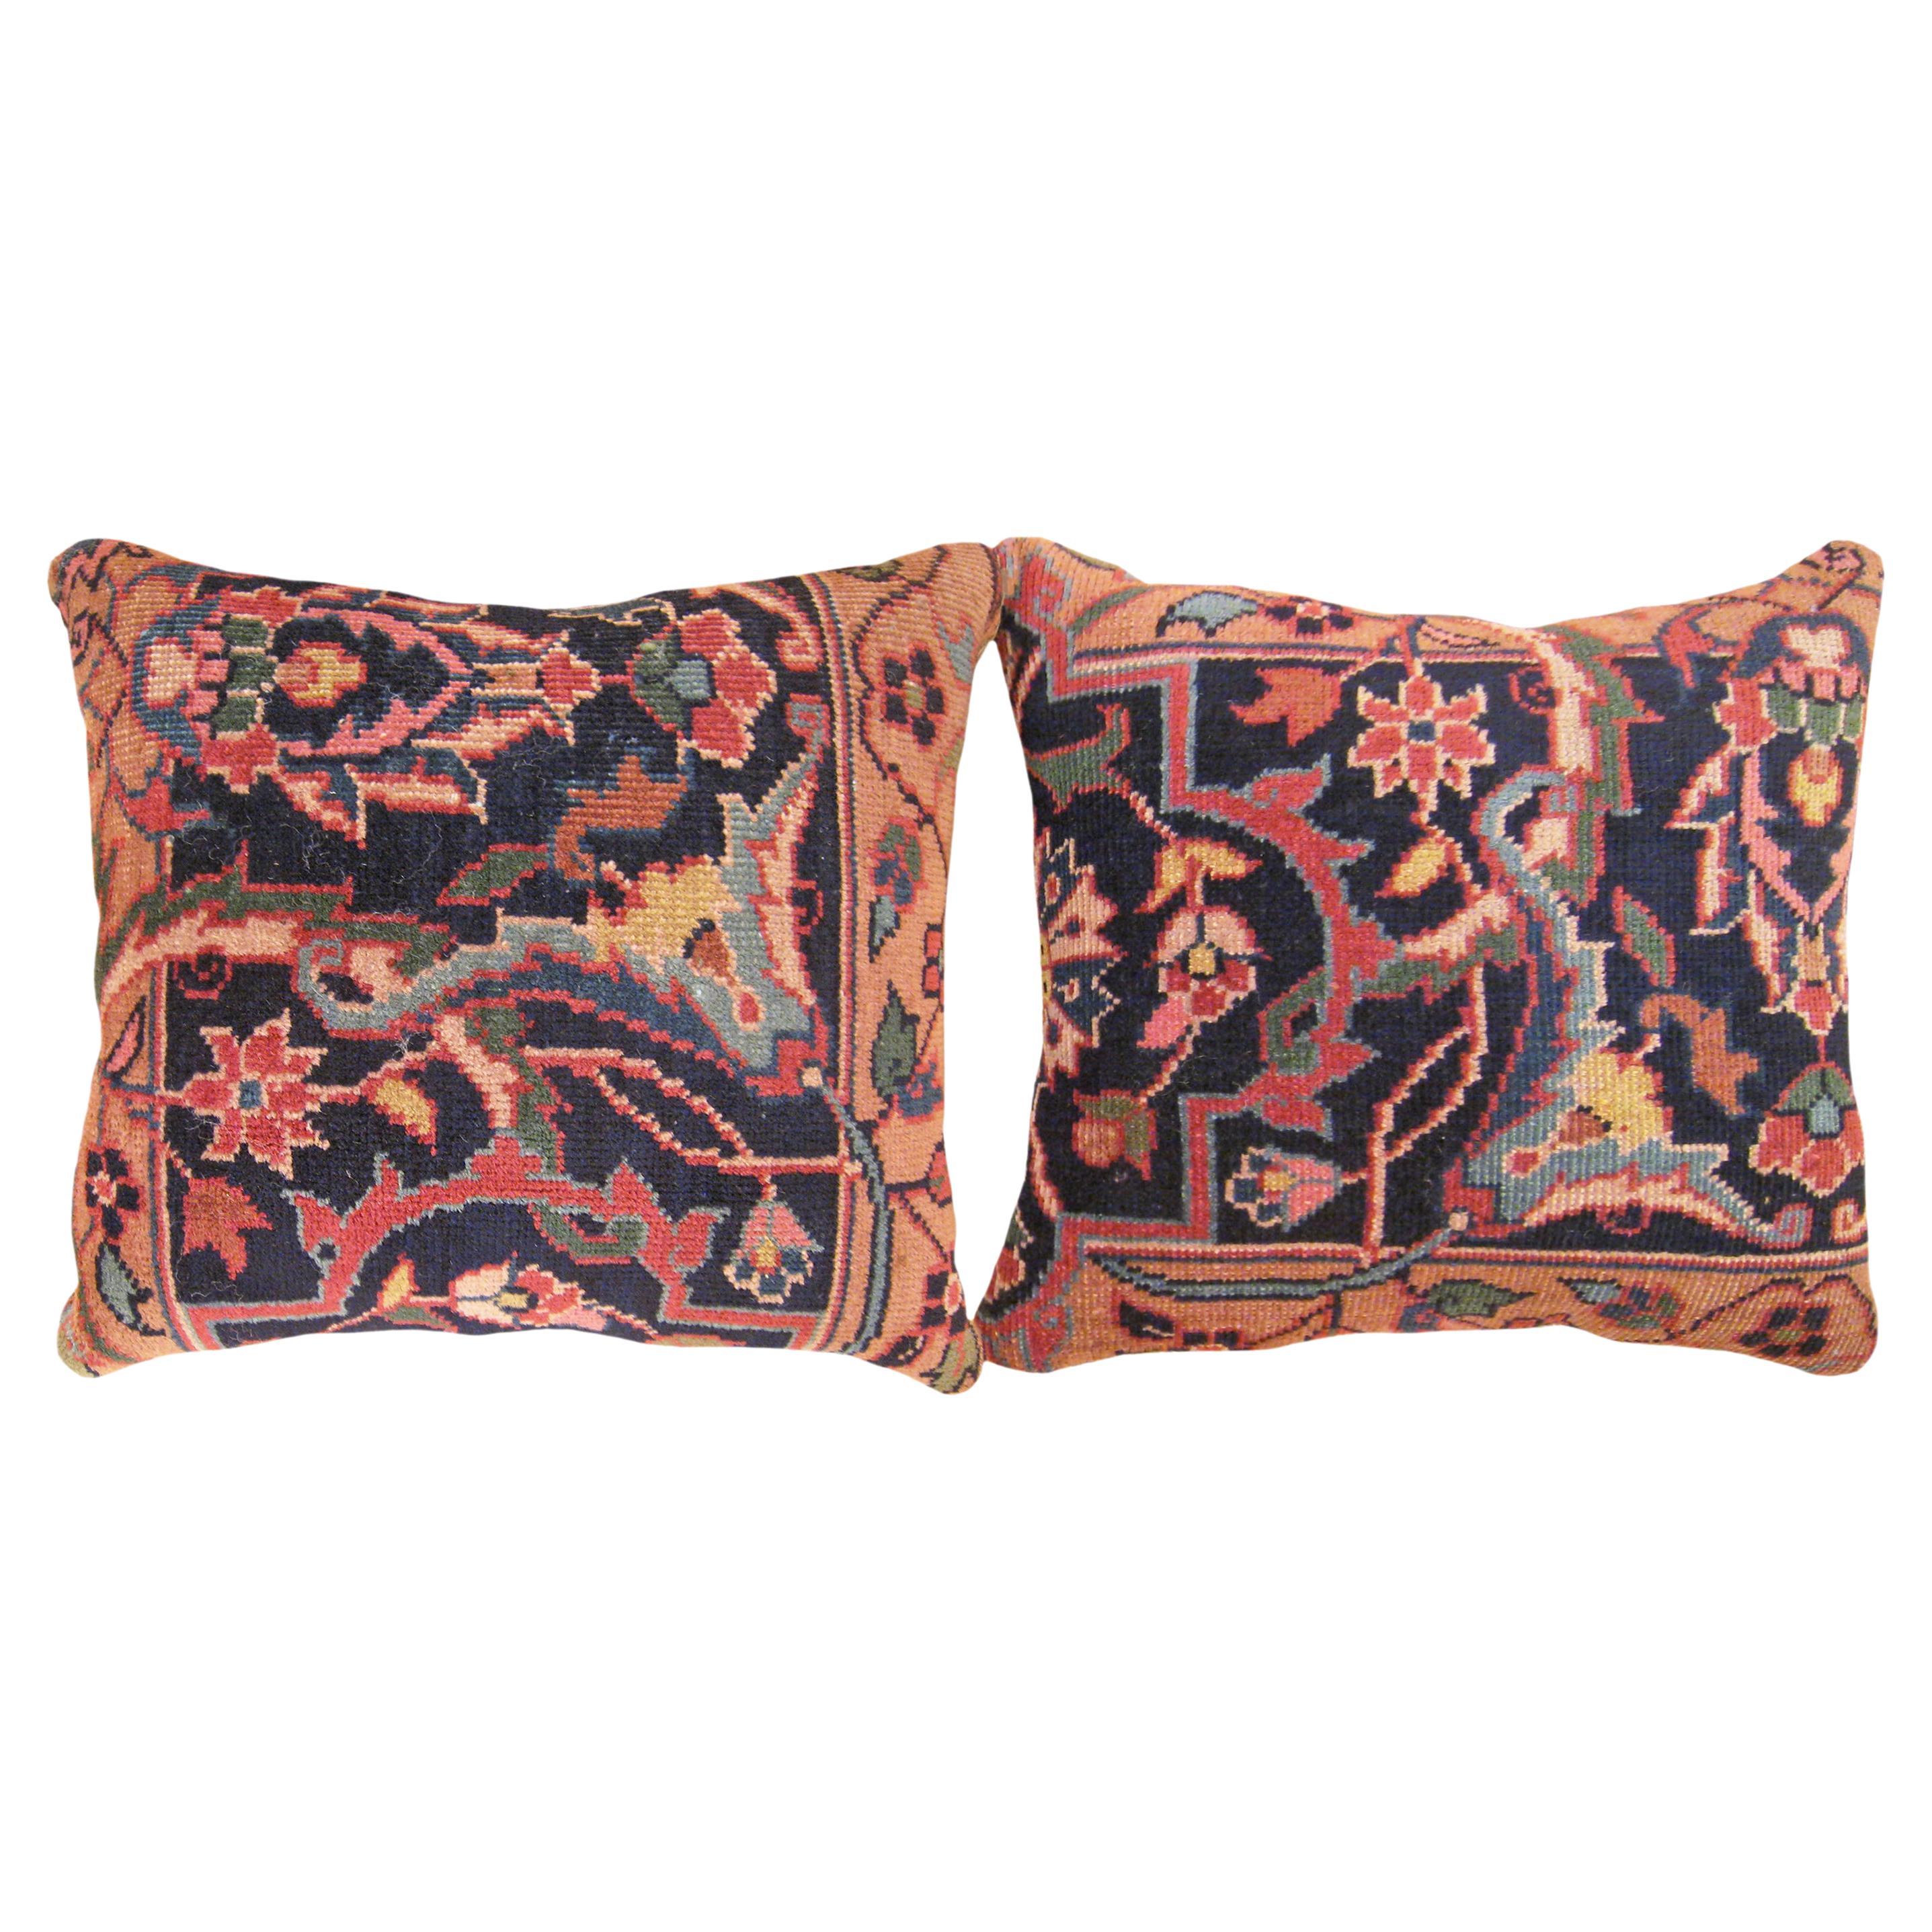 A Pair of Decorative Antique Indian Agra Rug Pillows with Floral Elements For Sale